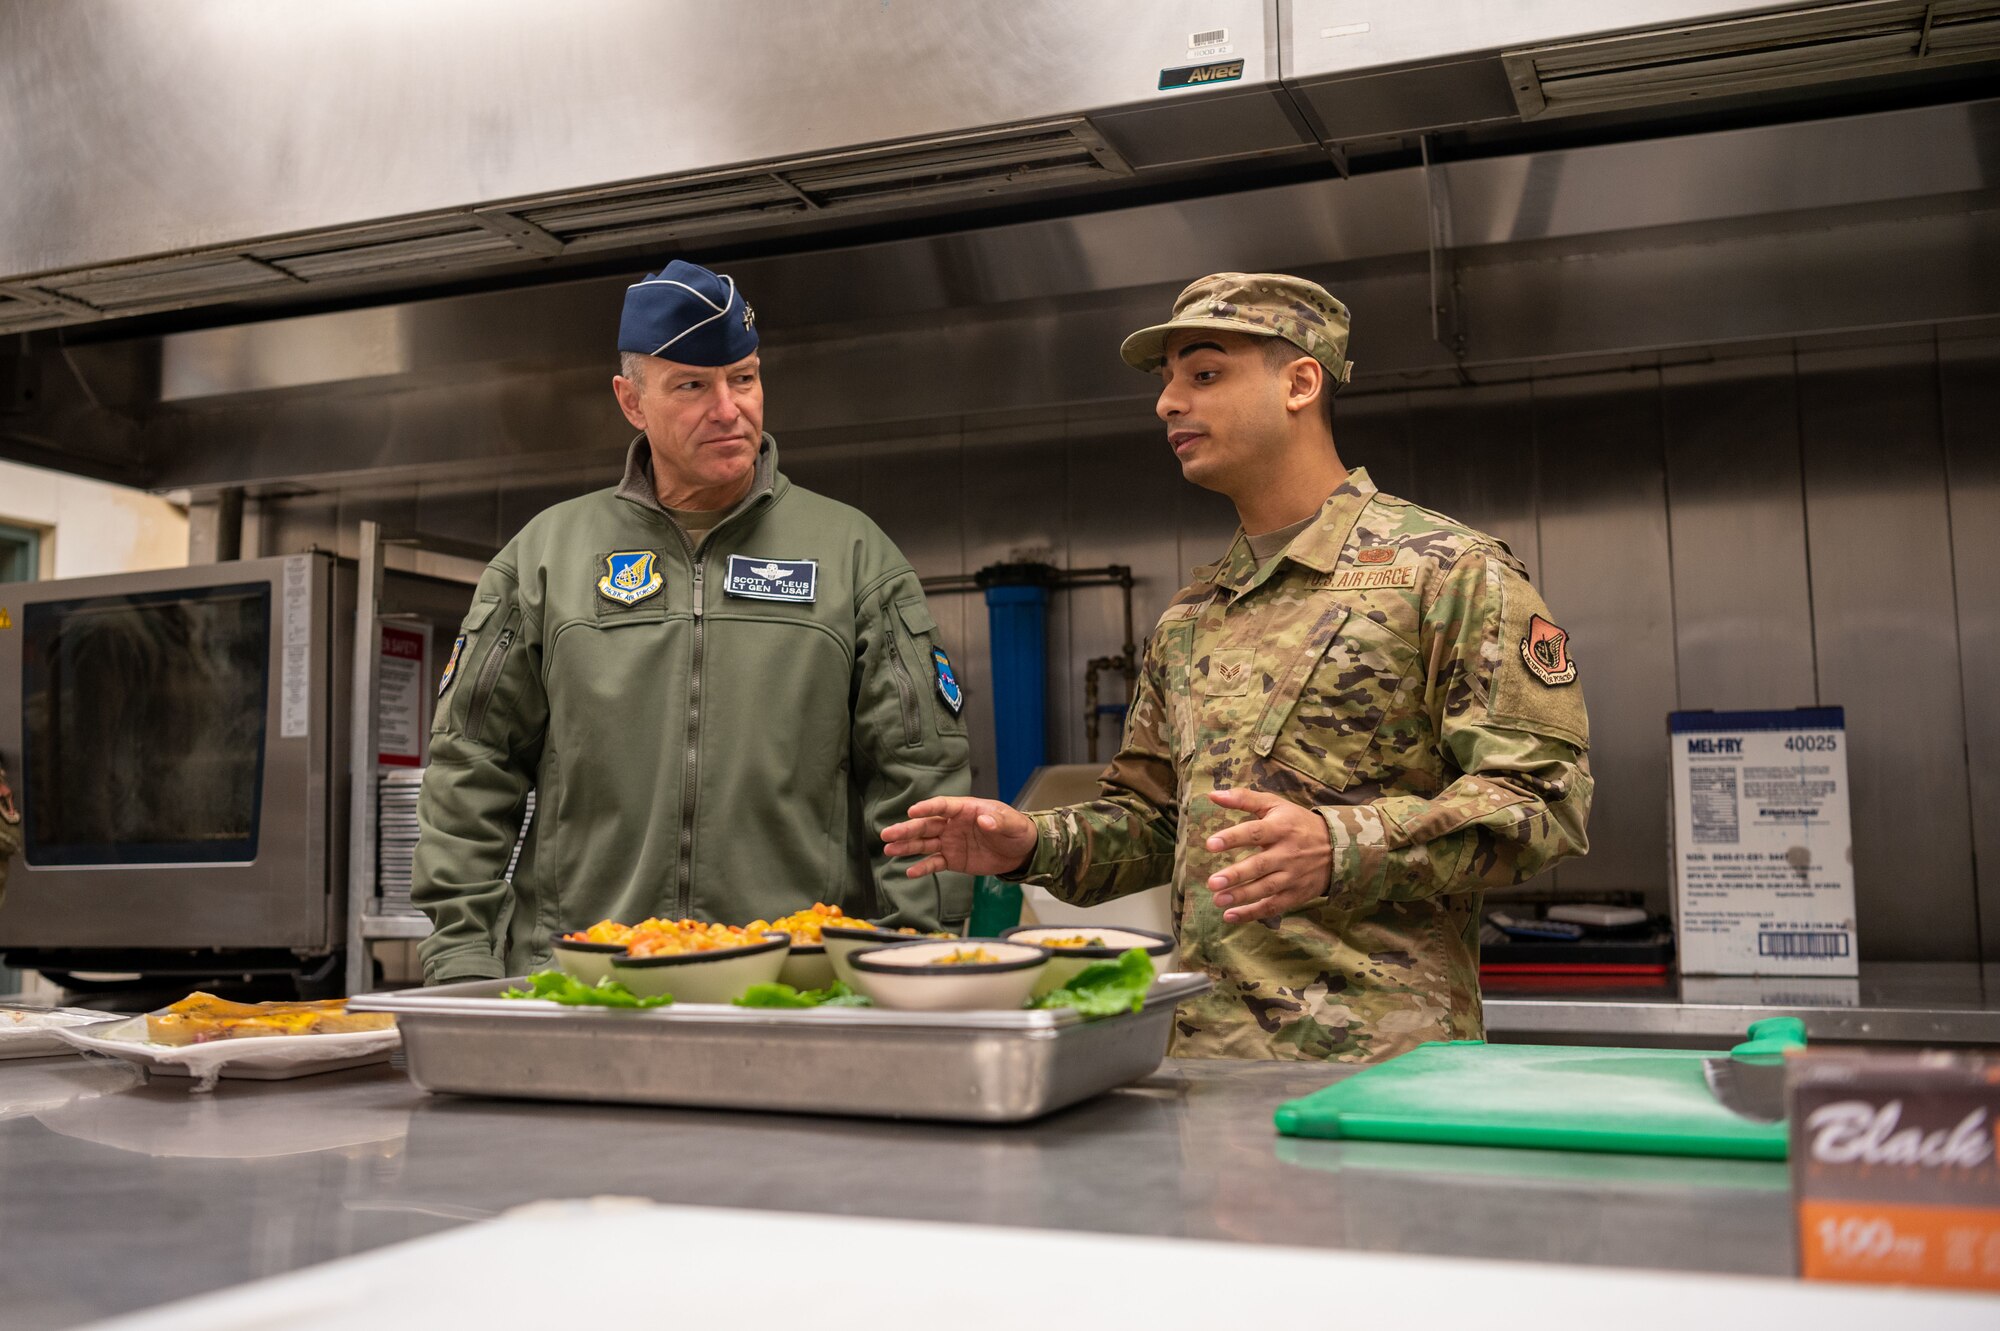 U.S. Air Force Senior Airman Reshaun Ali, 51st Force Support Squadron food service journeyman, showcases vegetarian and vegan meal options to Lt. Gen. Scott Pleus, 7th Air Force commander, at the Gingko Tree dining facility on Osan Air Base, Republic of Korea, Nov. 30, 2022.